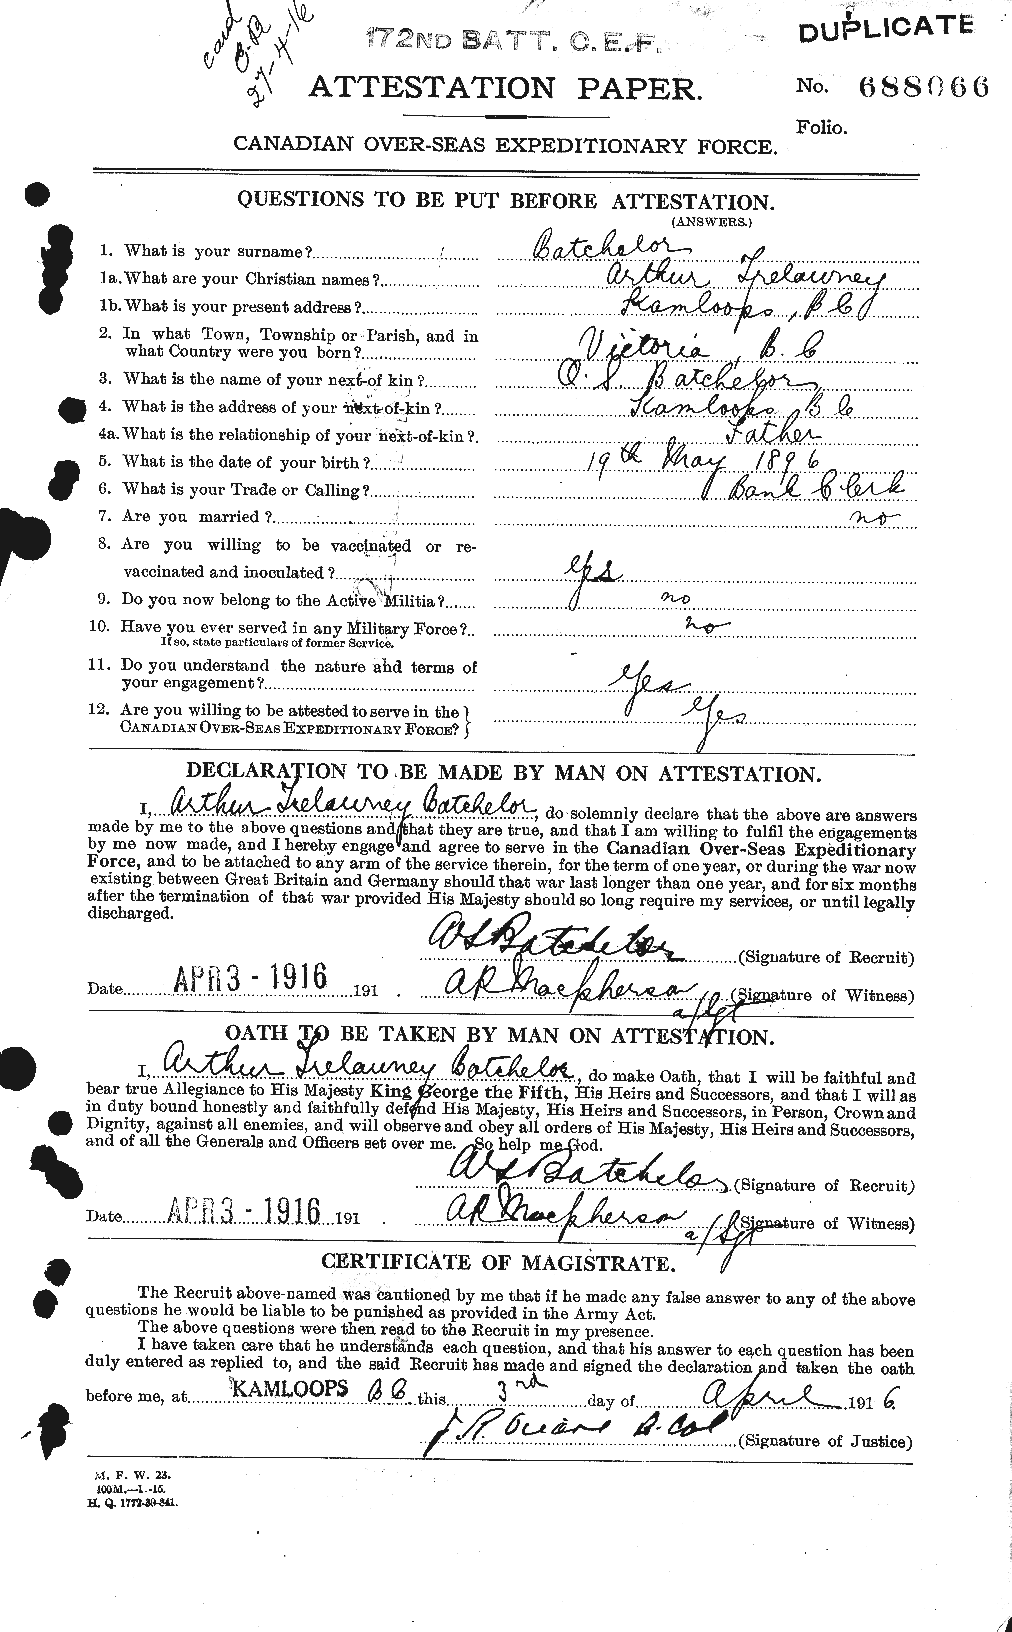 Personnel Records of the First World War - CEF 228176a